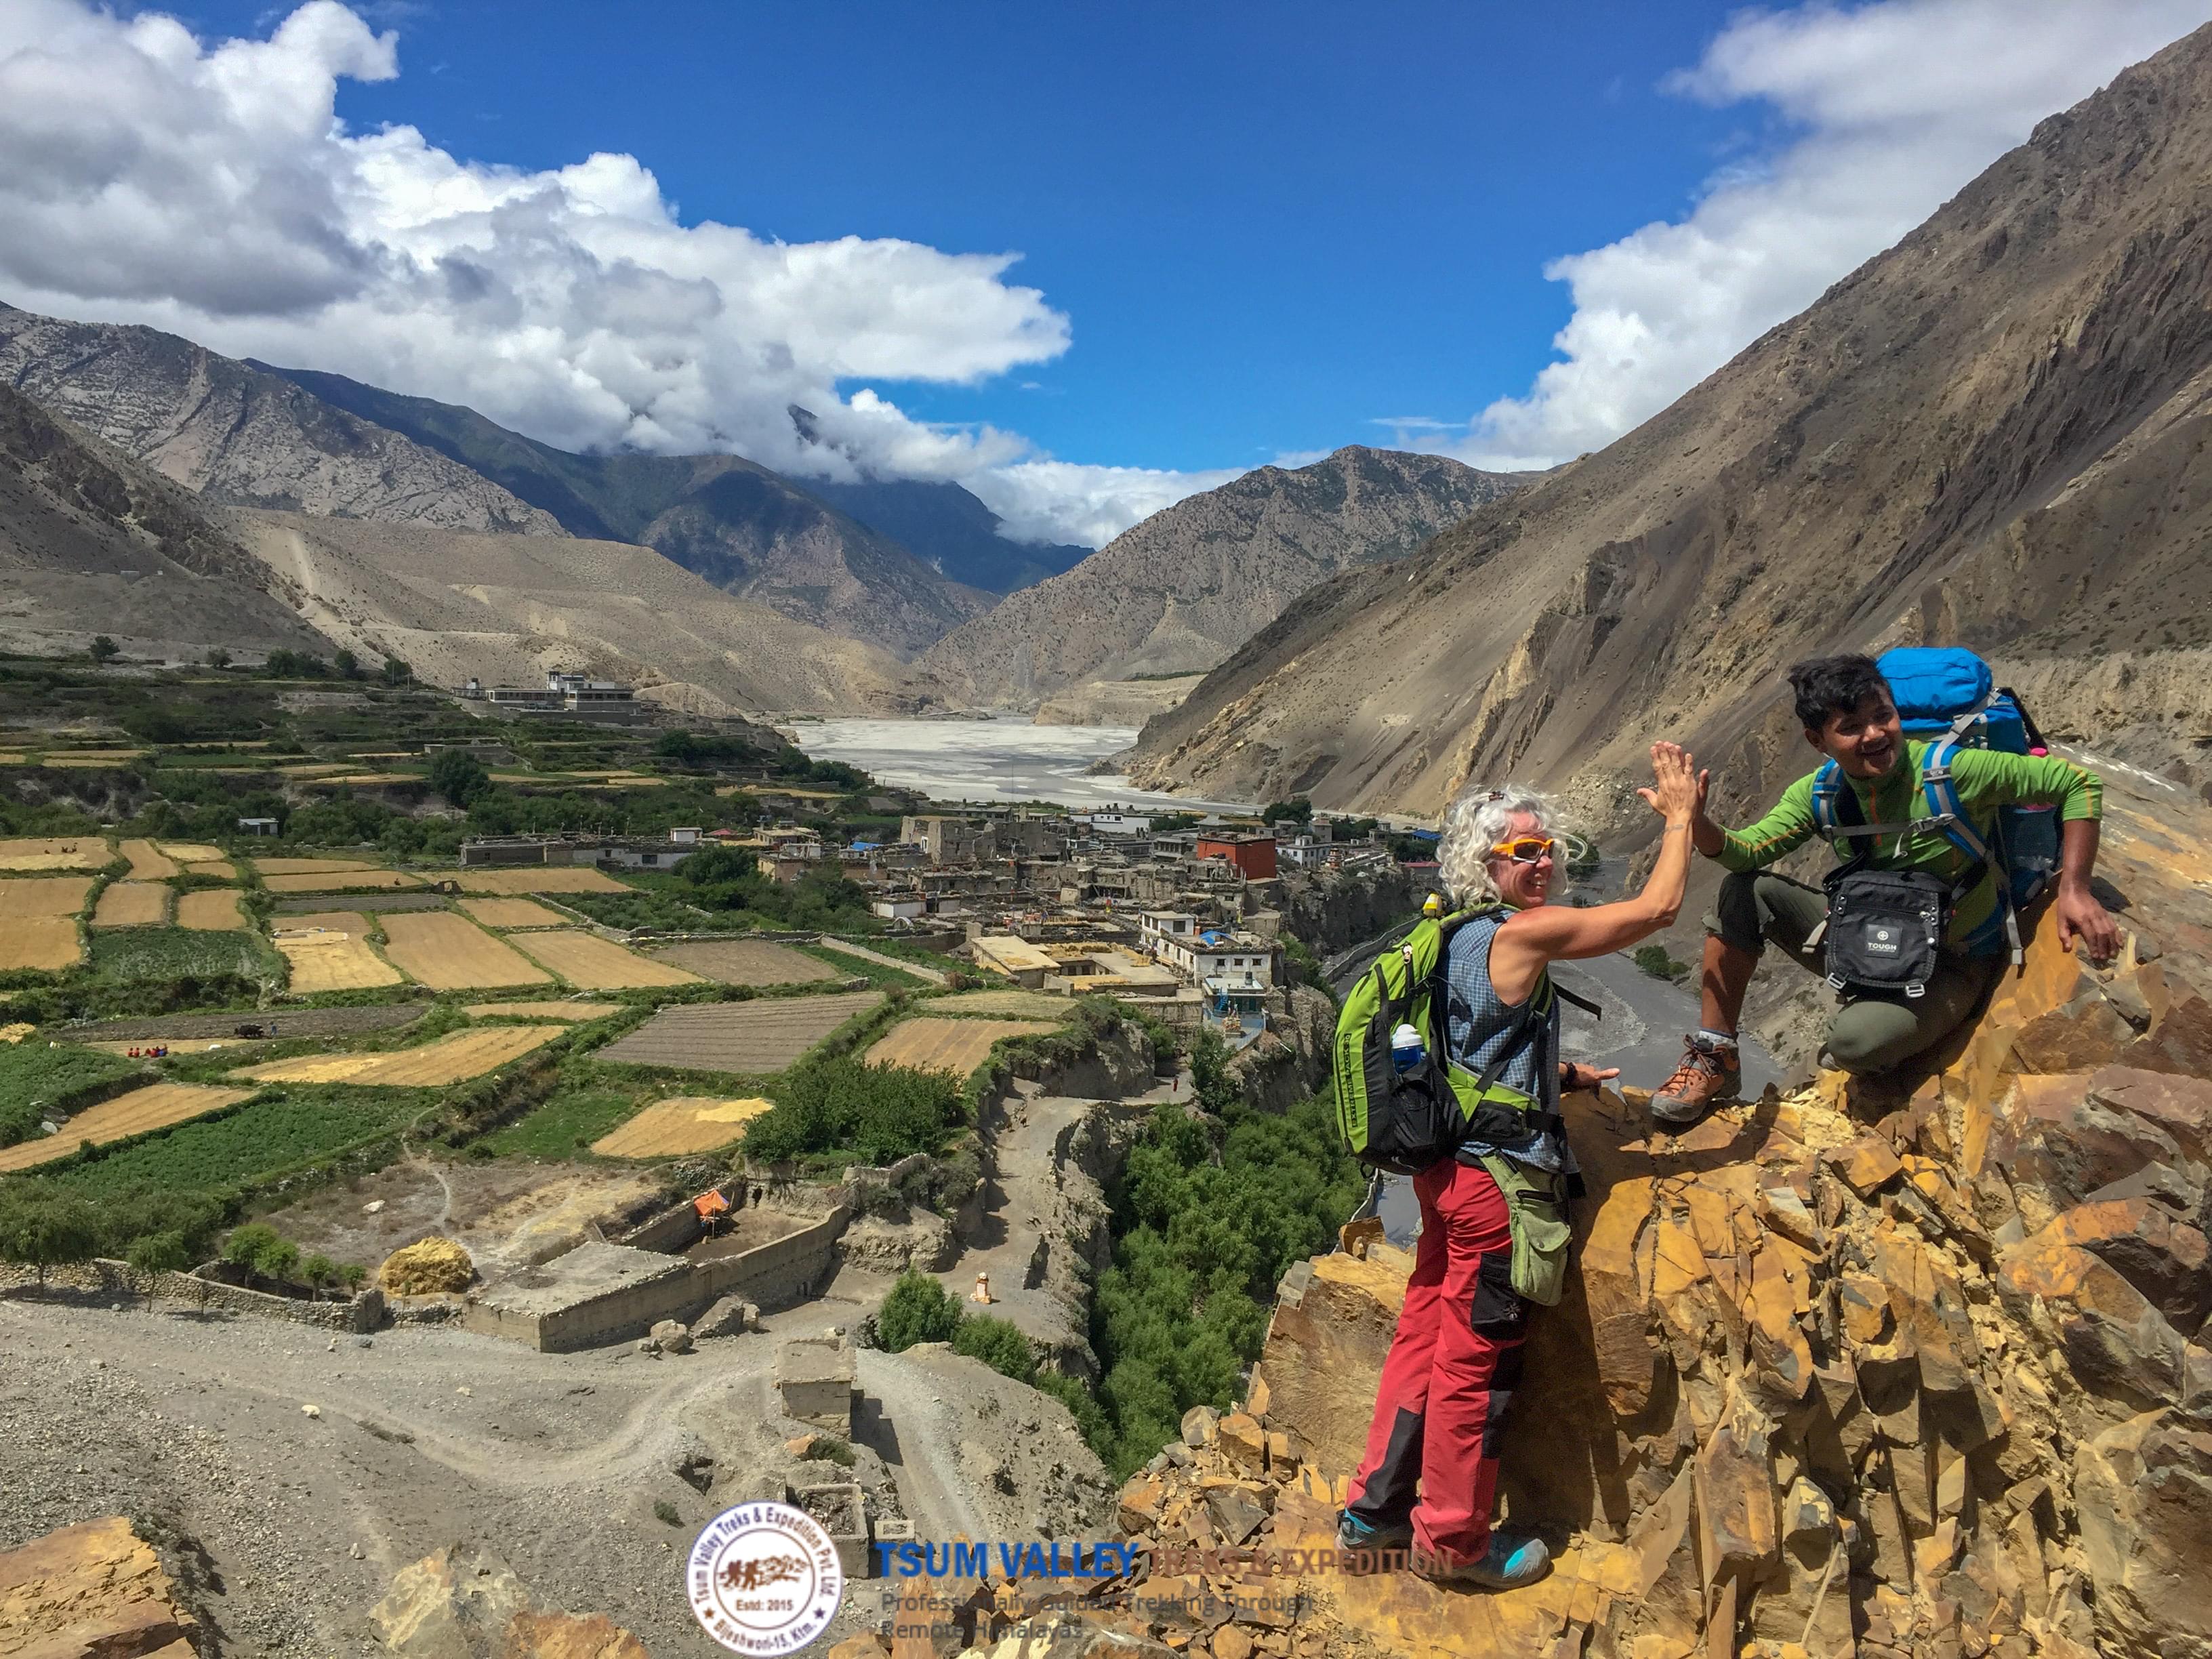 Why choose locally owned Trekking Companies?